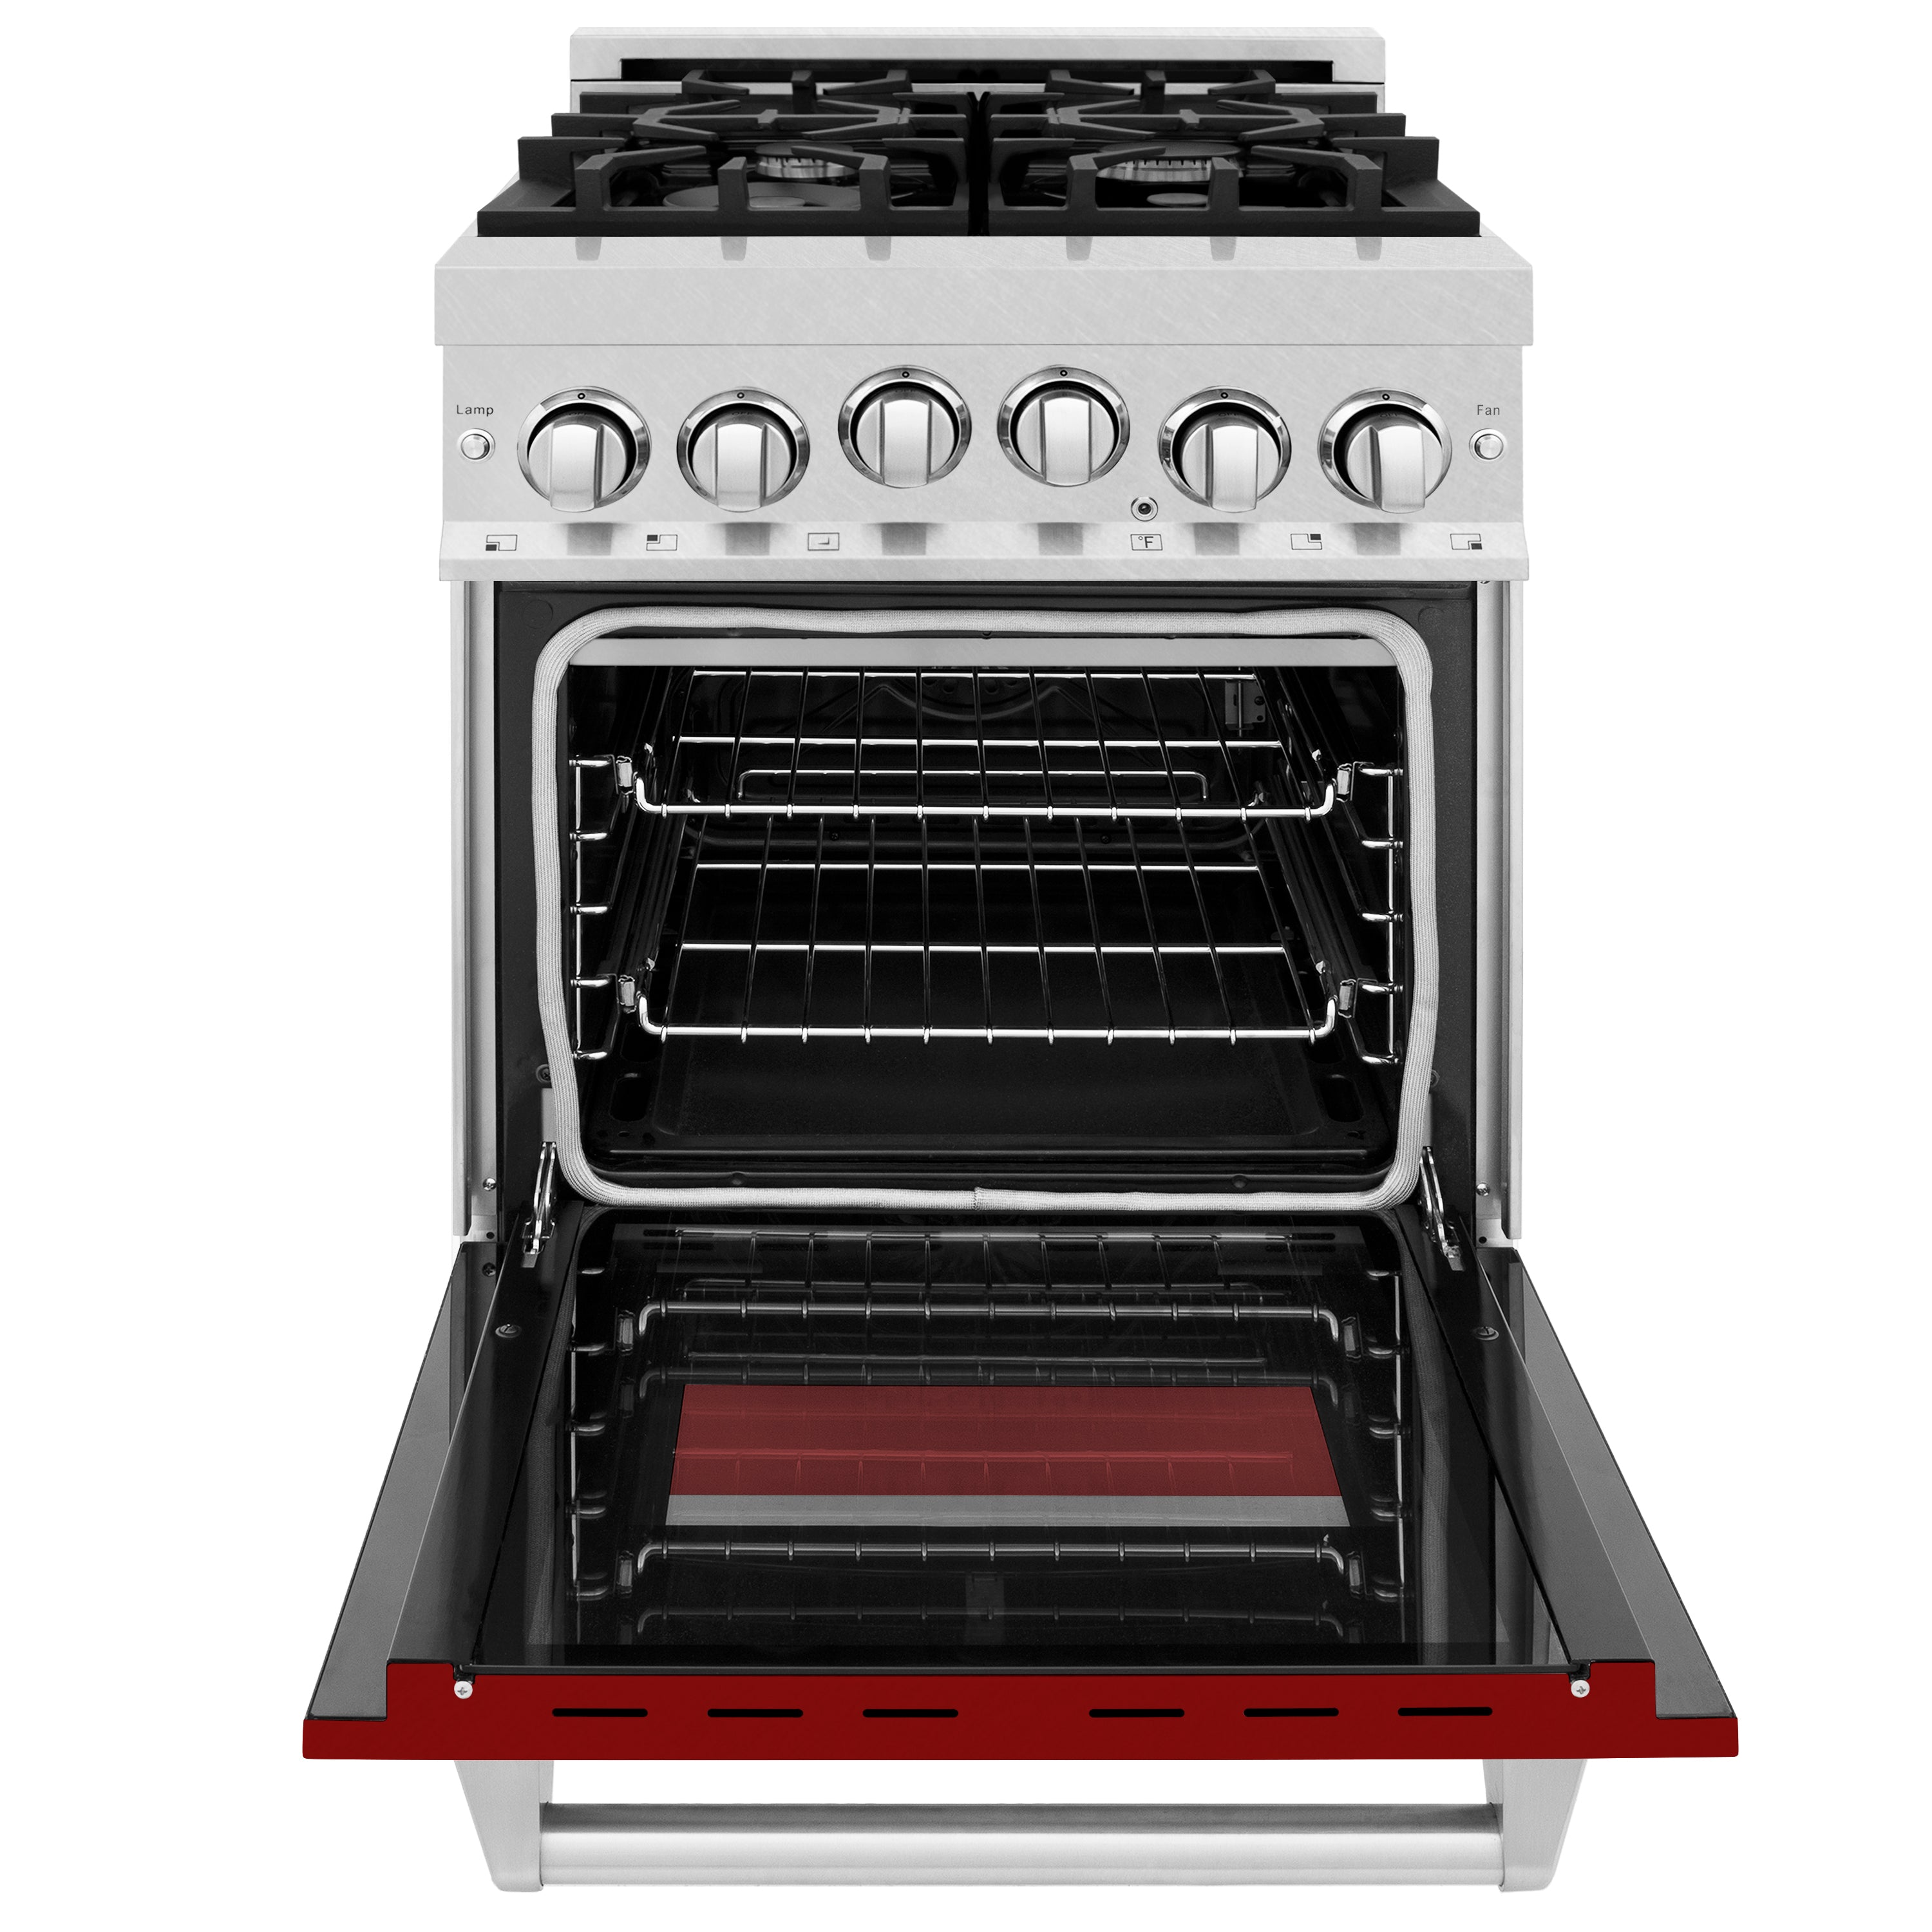 ZLINE 24" 2.8 cu. ft. Range with Gas Stove and Gas Oven in Fingerprint Resistant Stainless Steel and Red Gloss Door (RGS-RG-24)